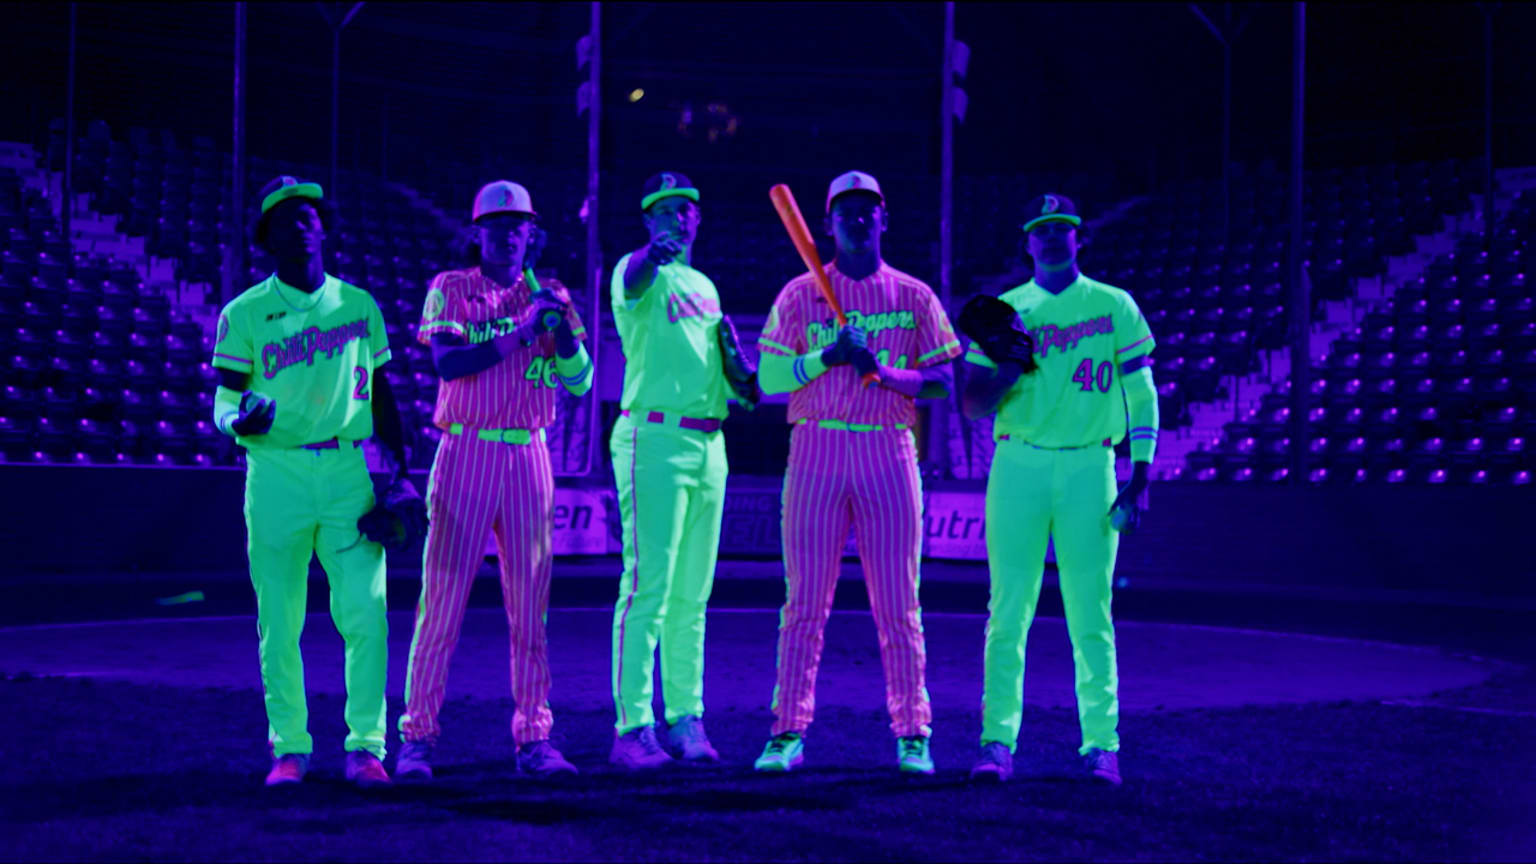 A photo of five players wearing glowing uniforms under black lights